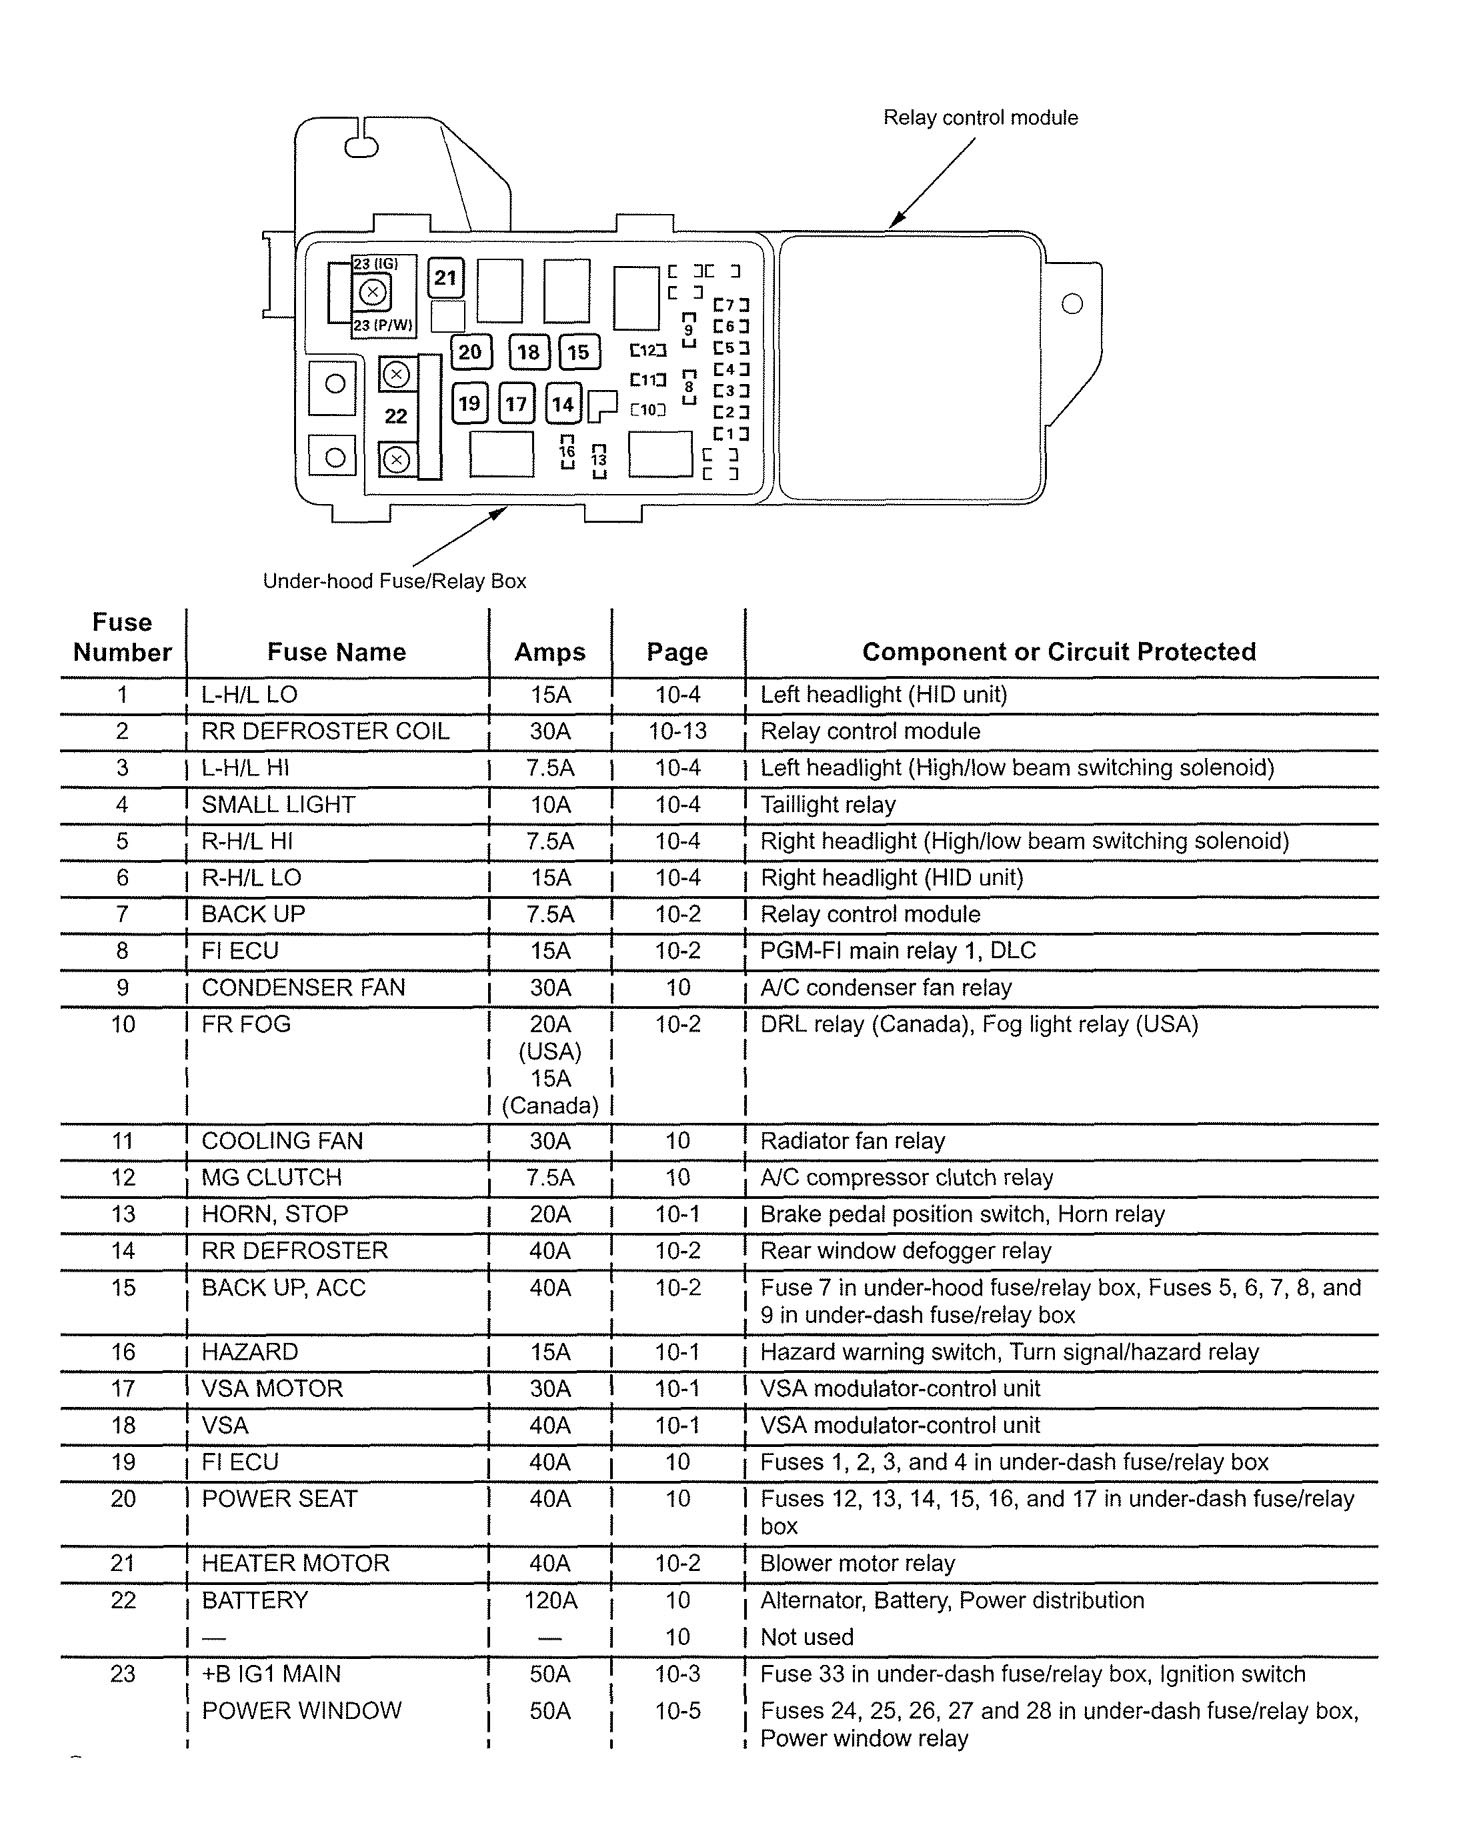 Acura TL (2005) - wiring diagrams - fuse panel - Carknowledge.info